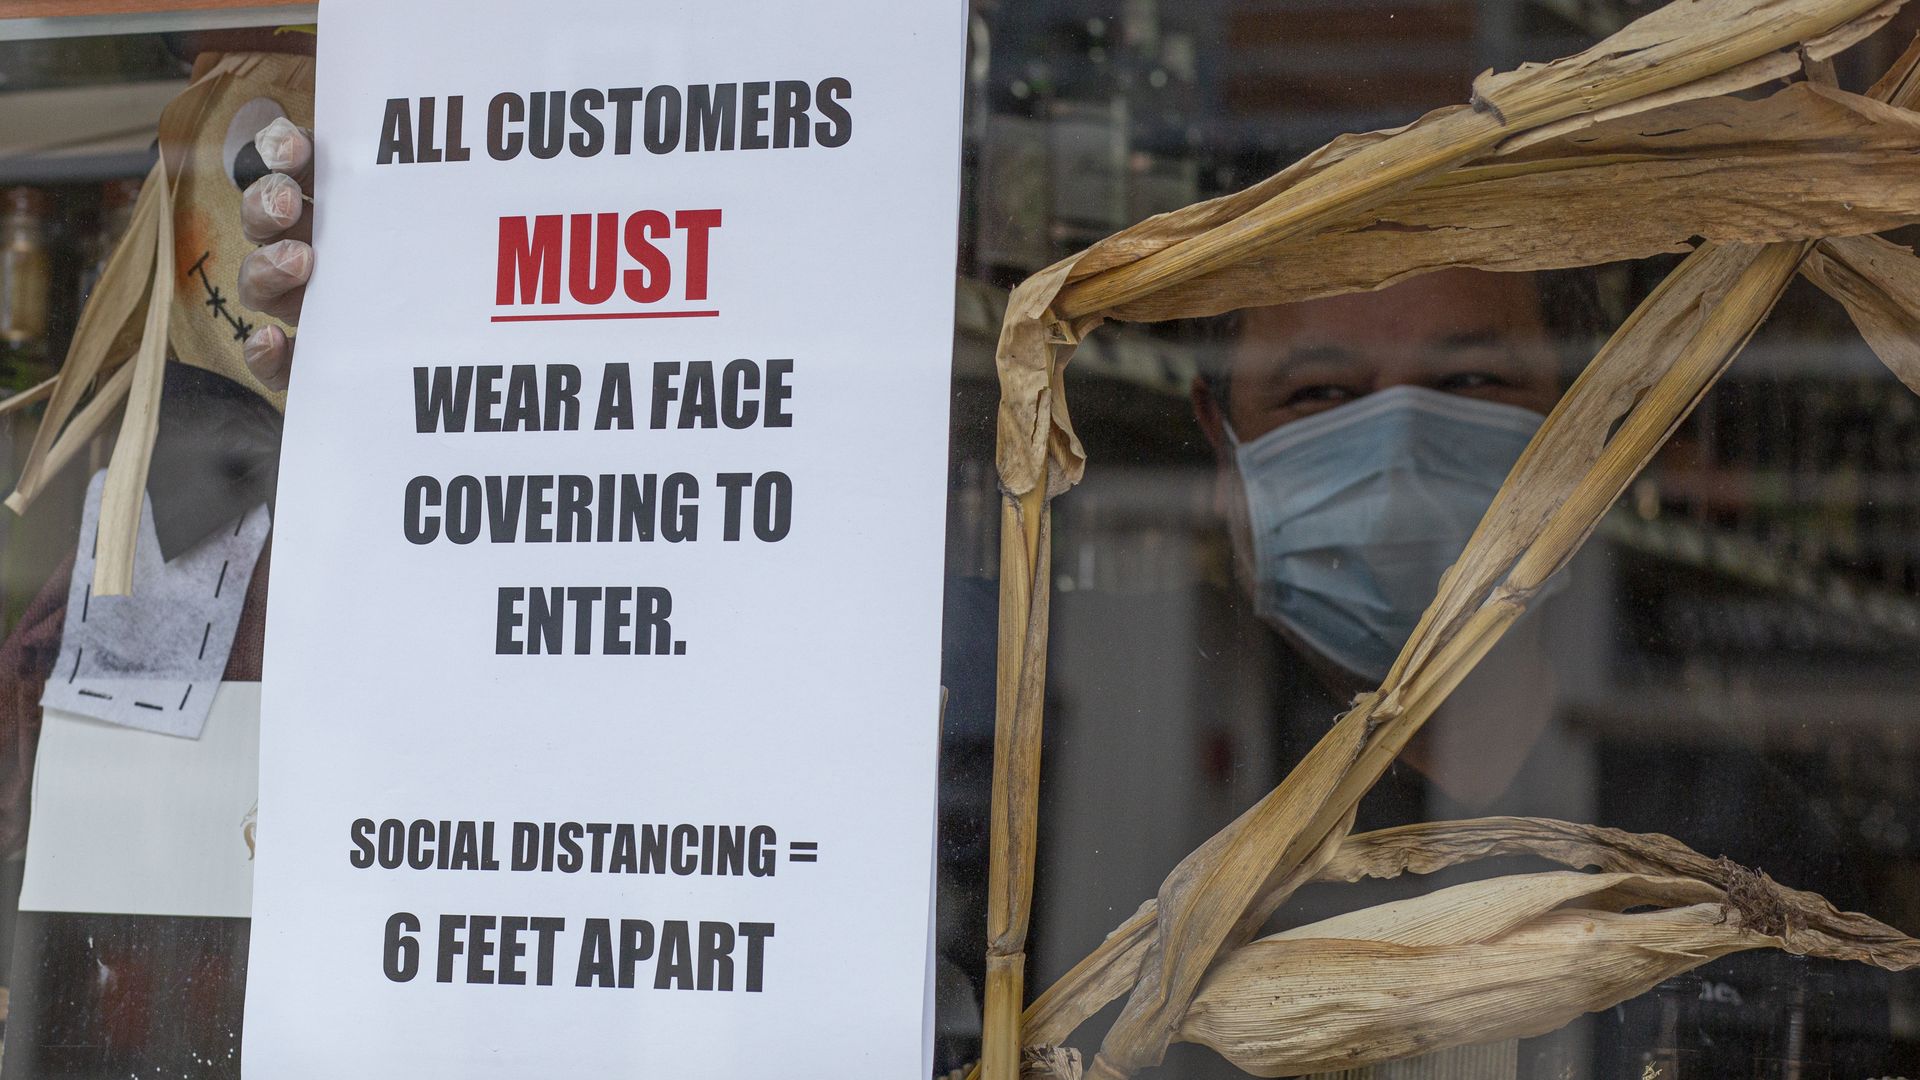 Sign in a store requiring customers to wear masks to enter